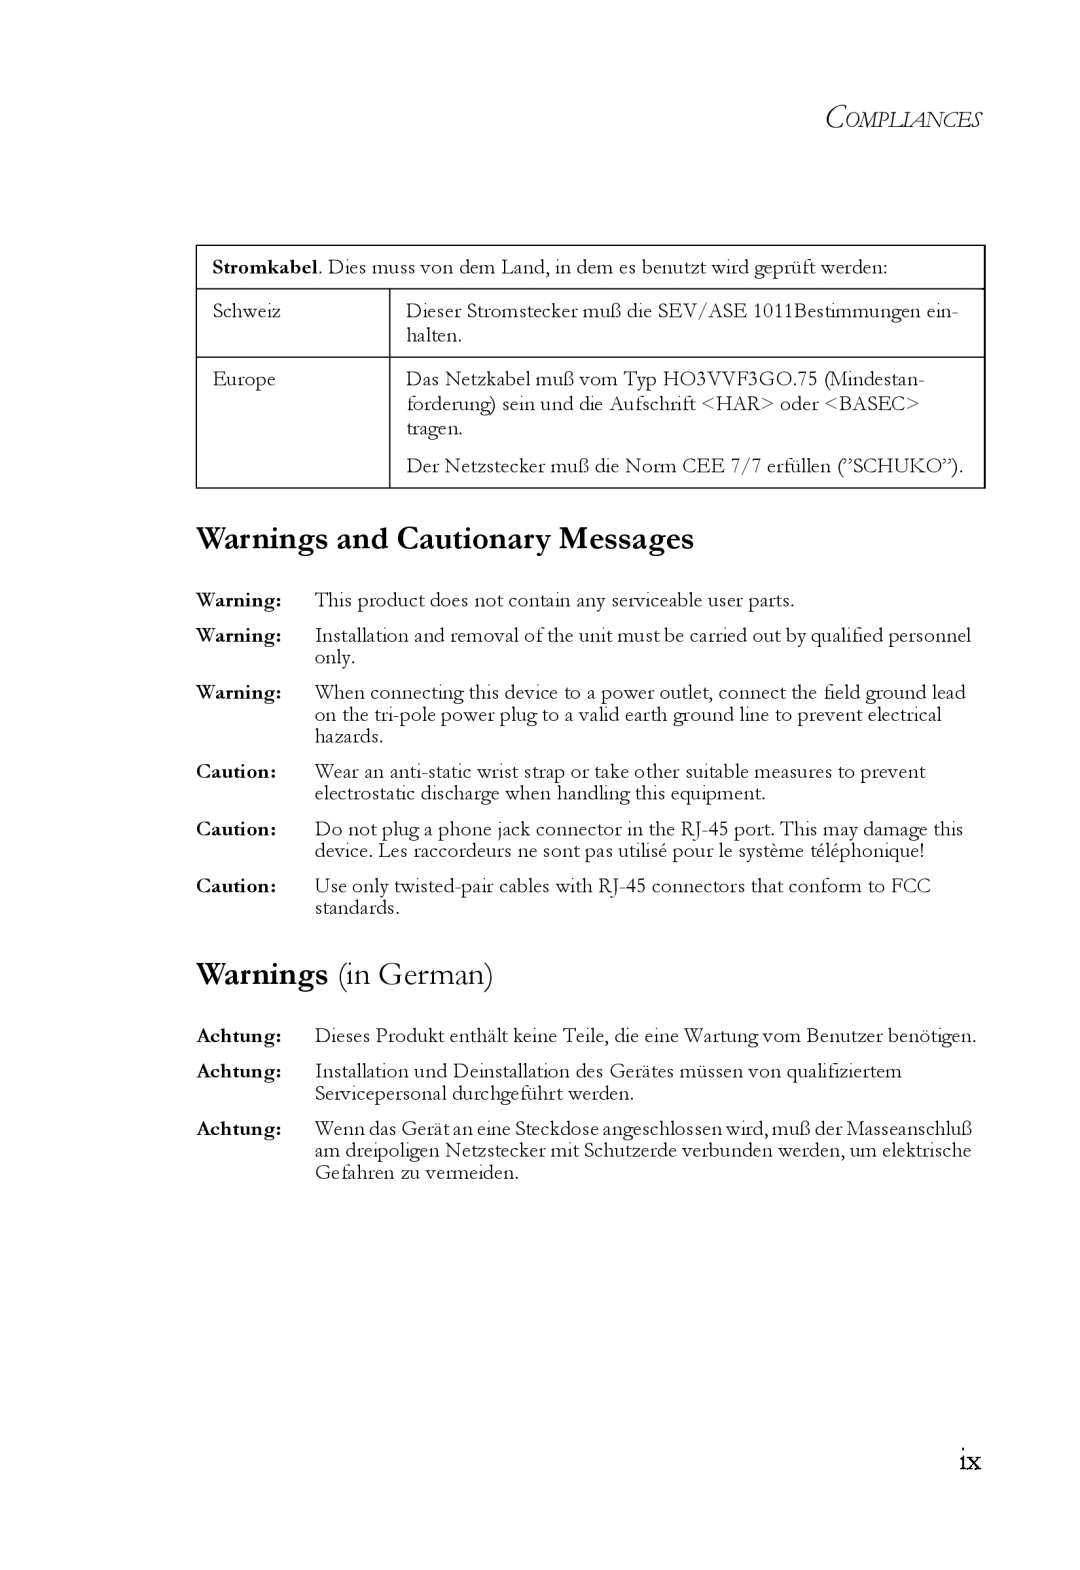 SMC Networks SMCGS24 manual Warnings and Cautionary Messages, Warnings in German, Compliances 